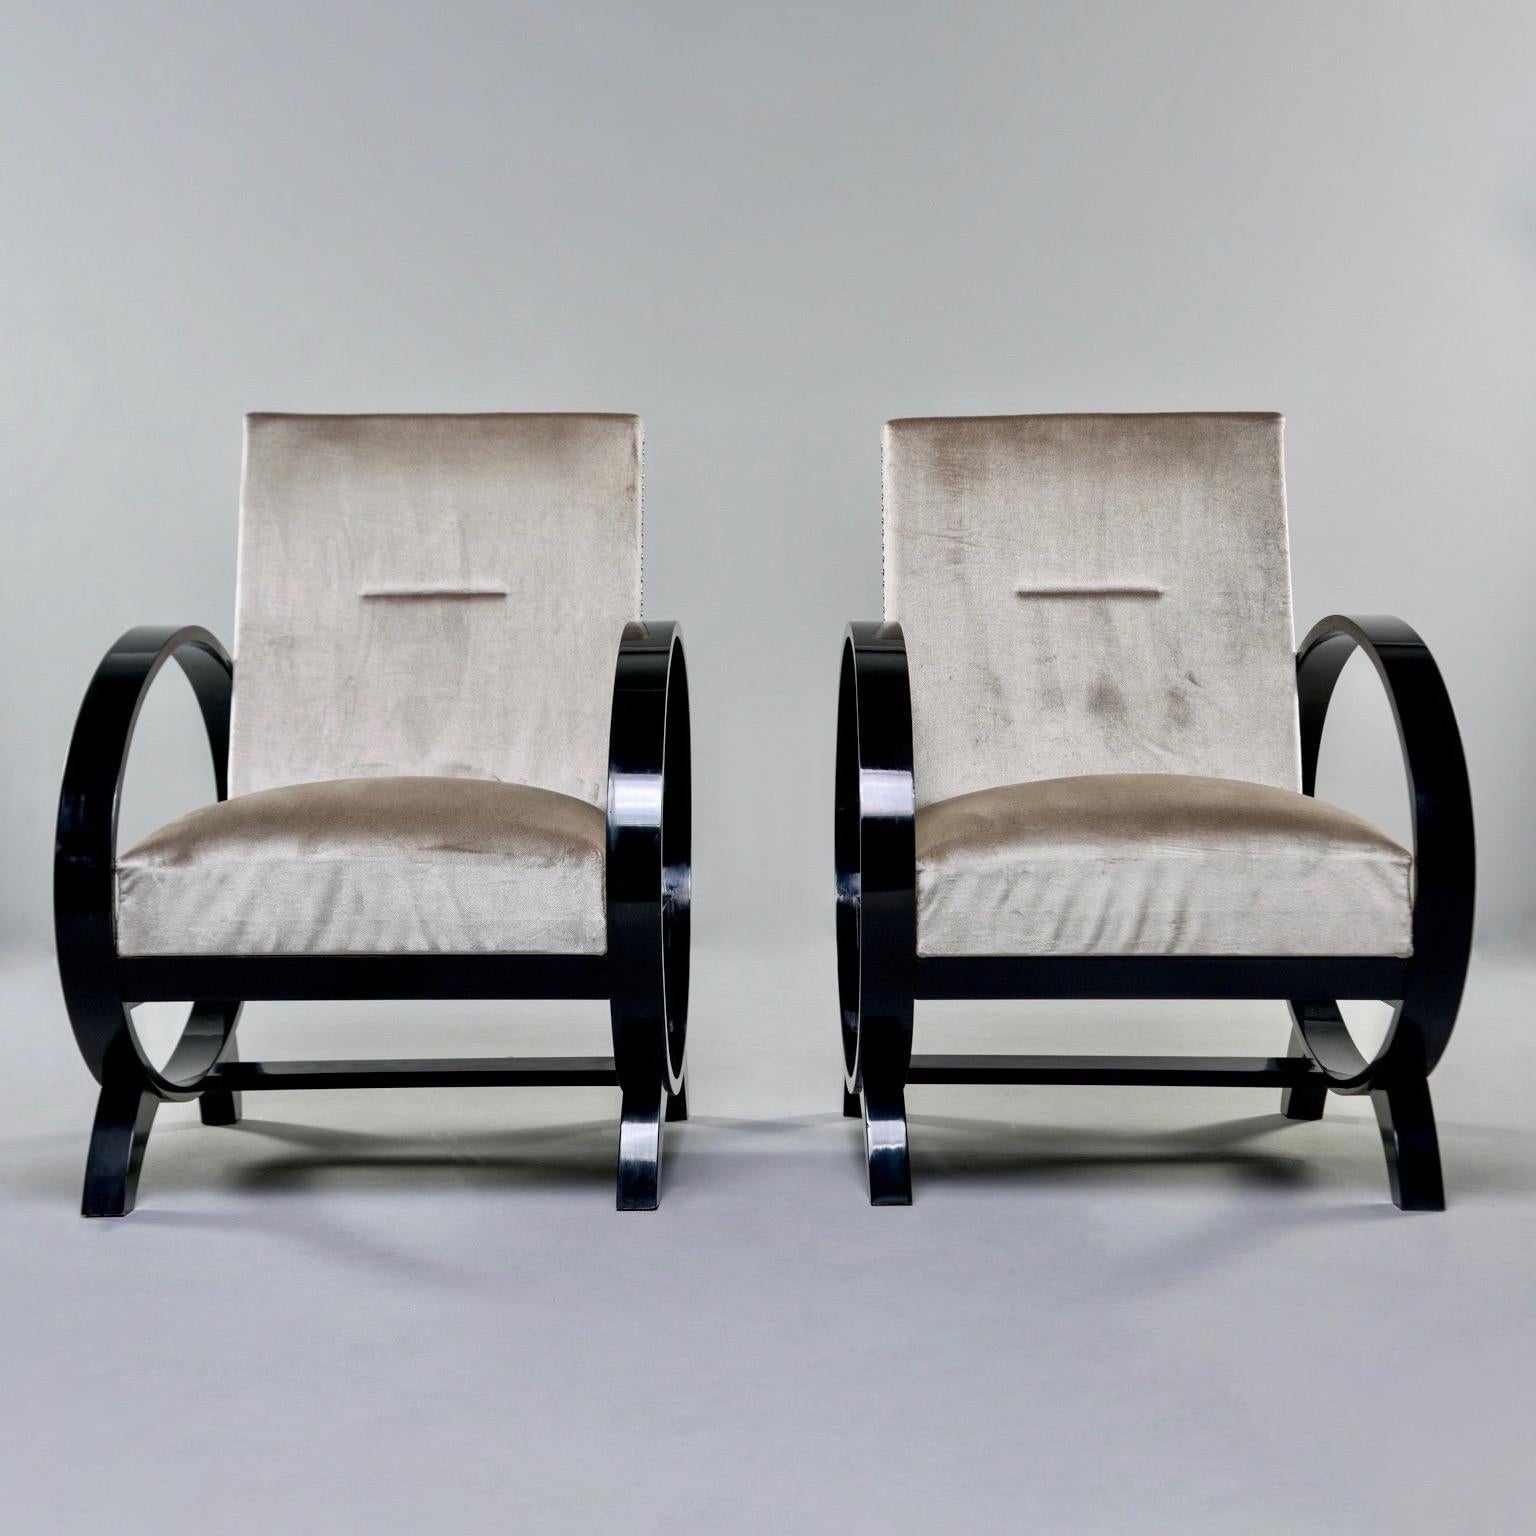 Pair of Italian Art Deco lounge chairs feature dramatic, oval wood arms, circa 1940s. Frames have black finish and newly upholstered in a sand colored velvet with a bit of sheen. Silver tone nailhead trim. Unknown maker. Sold and priced as a